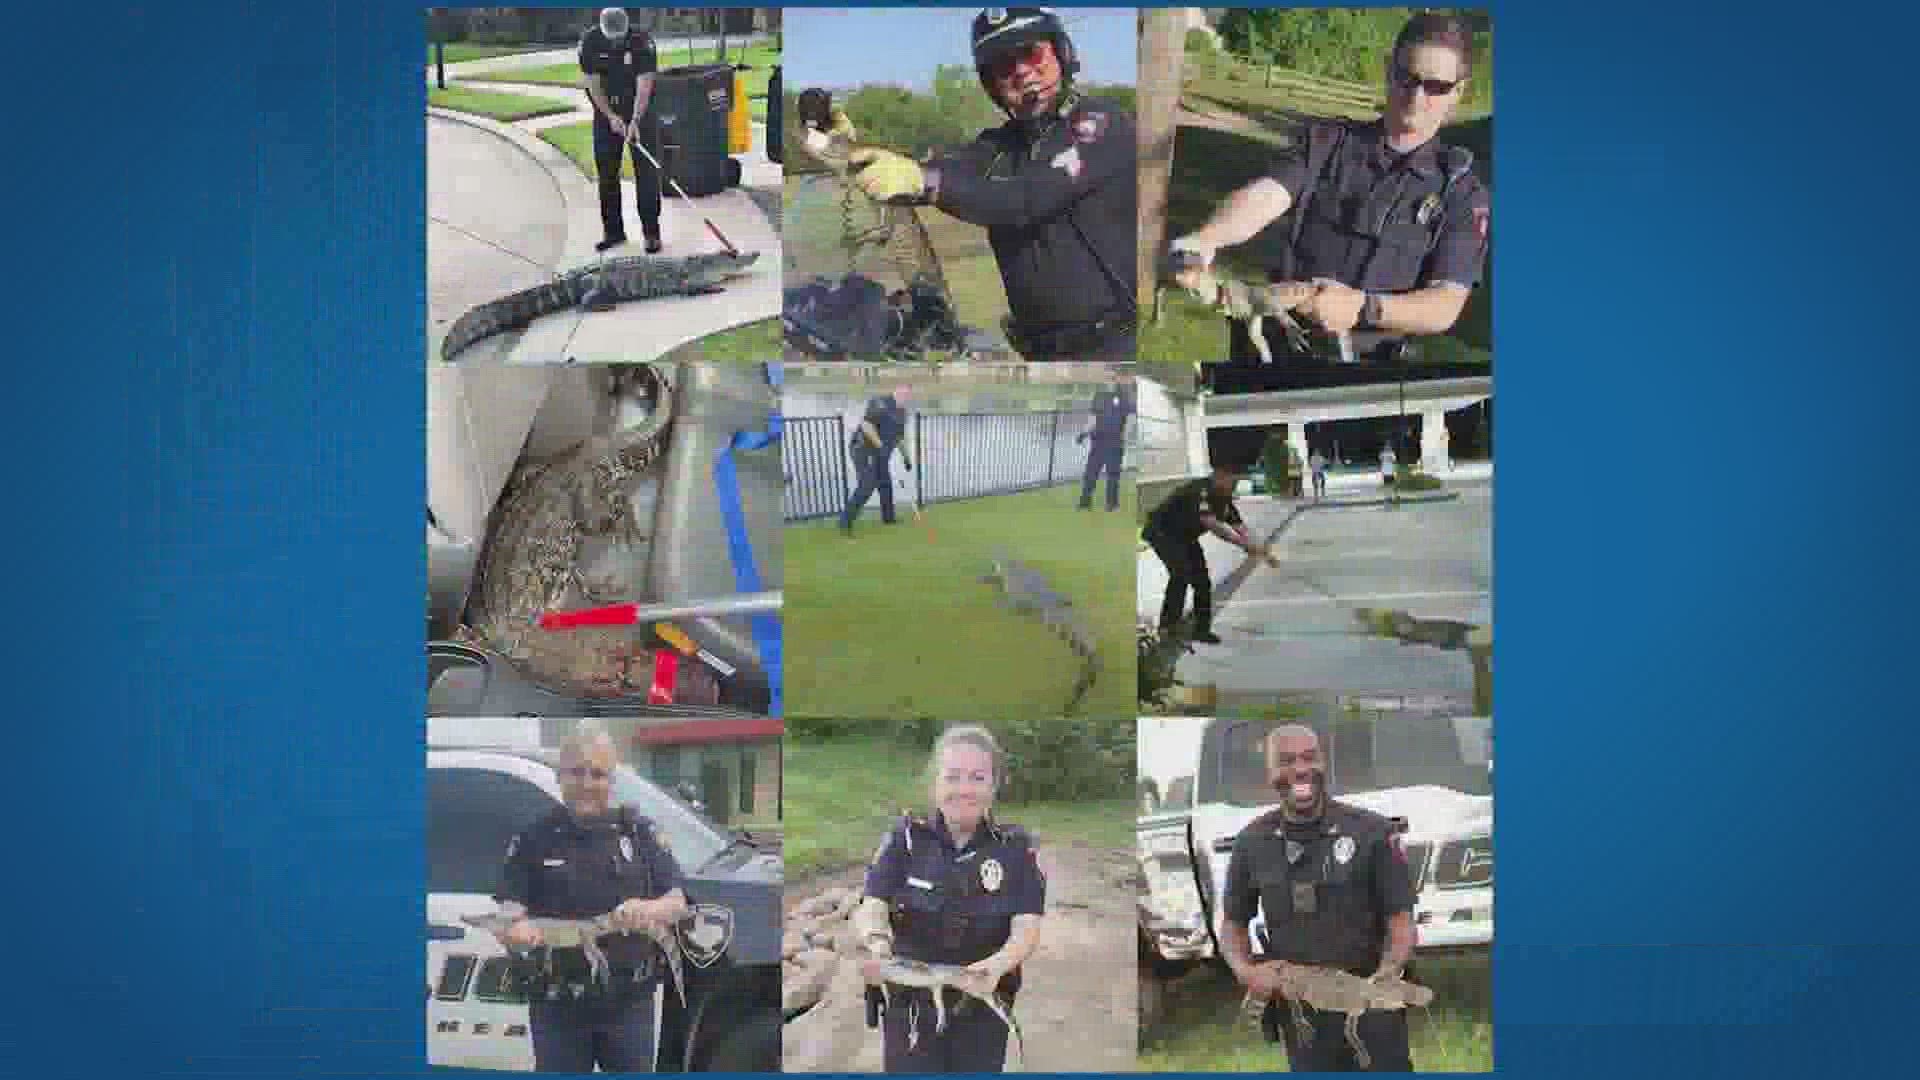 Fulshear police have been snapping photos with the gators, which have been making their presence known quite frequently around town.